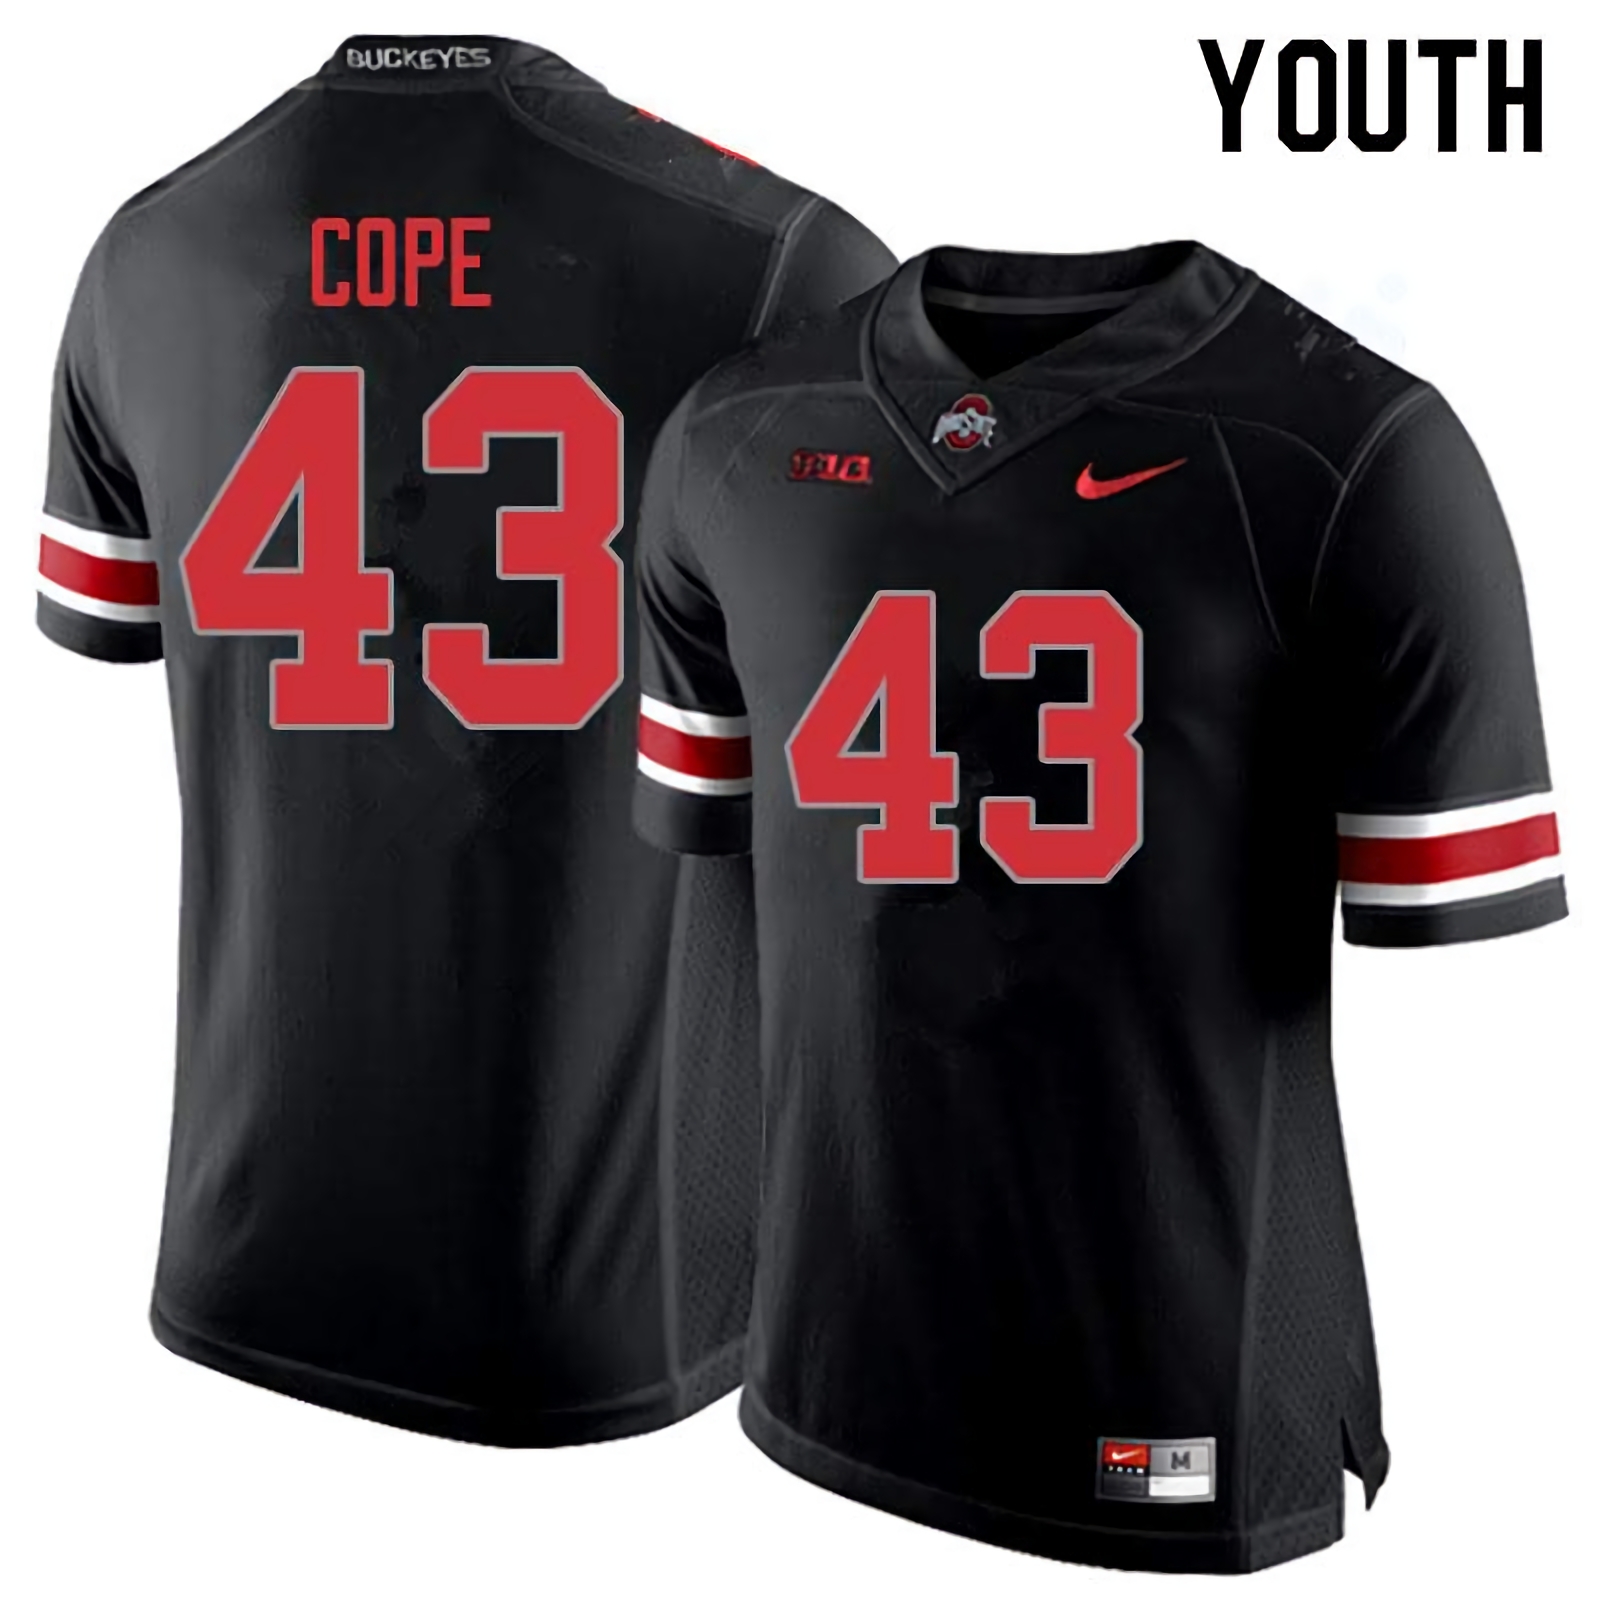 Robert Cope Ohio State Buckeyes Youth NCAA #43 Nike Blackout College Stitched Football Jersey HAE0456CZ